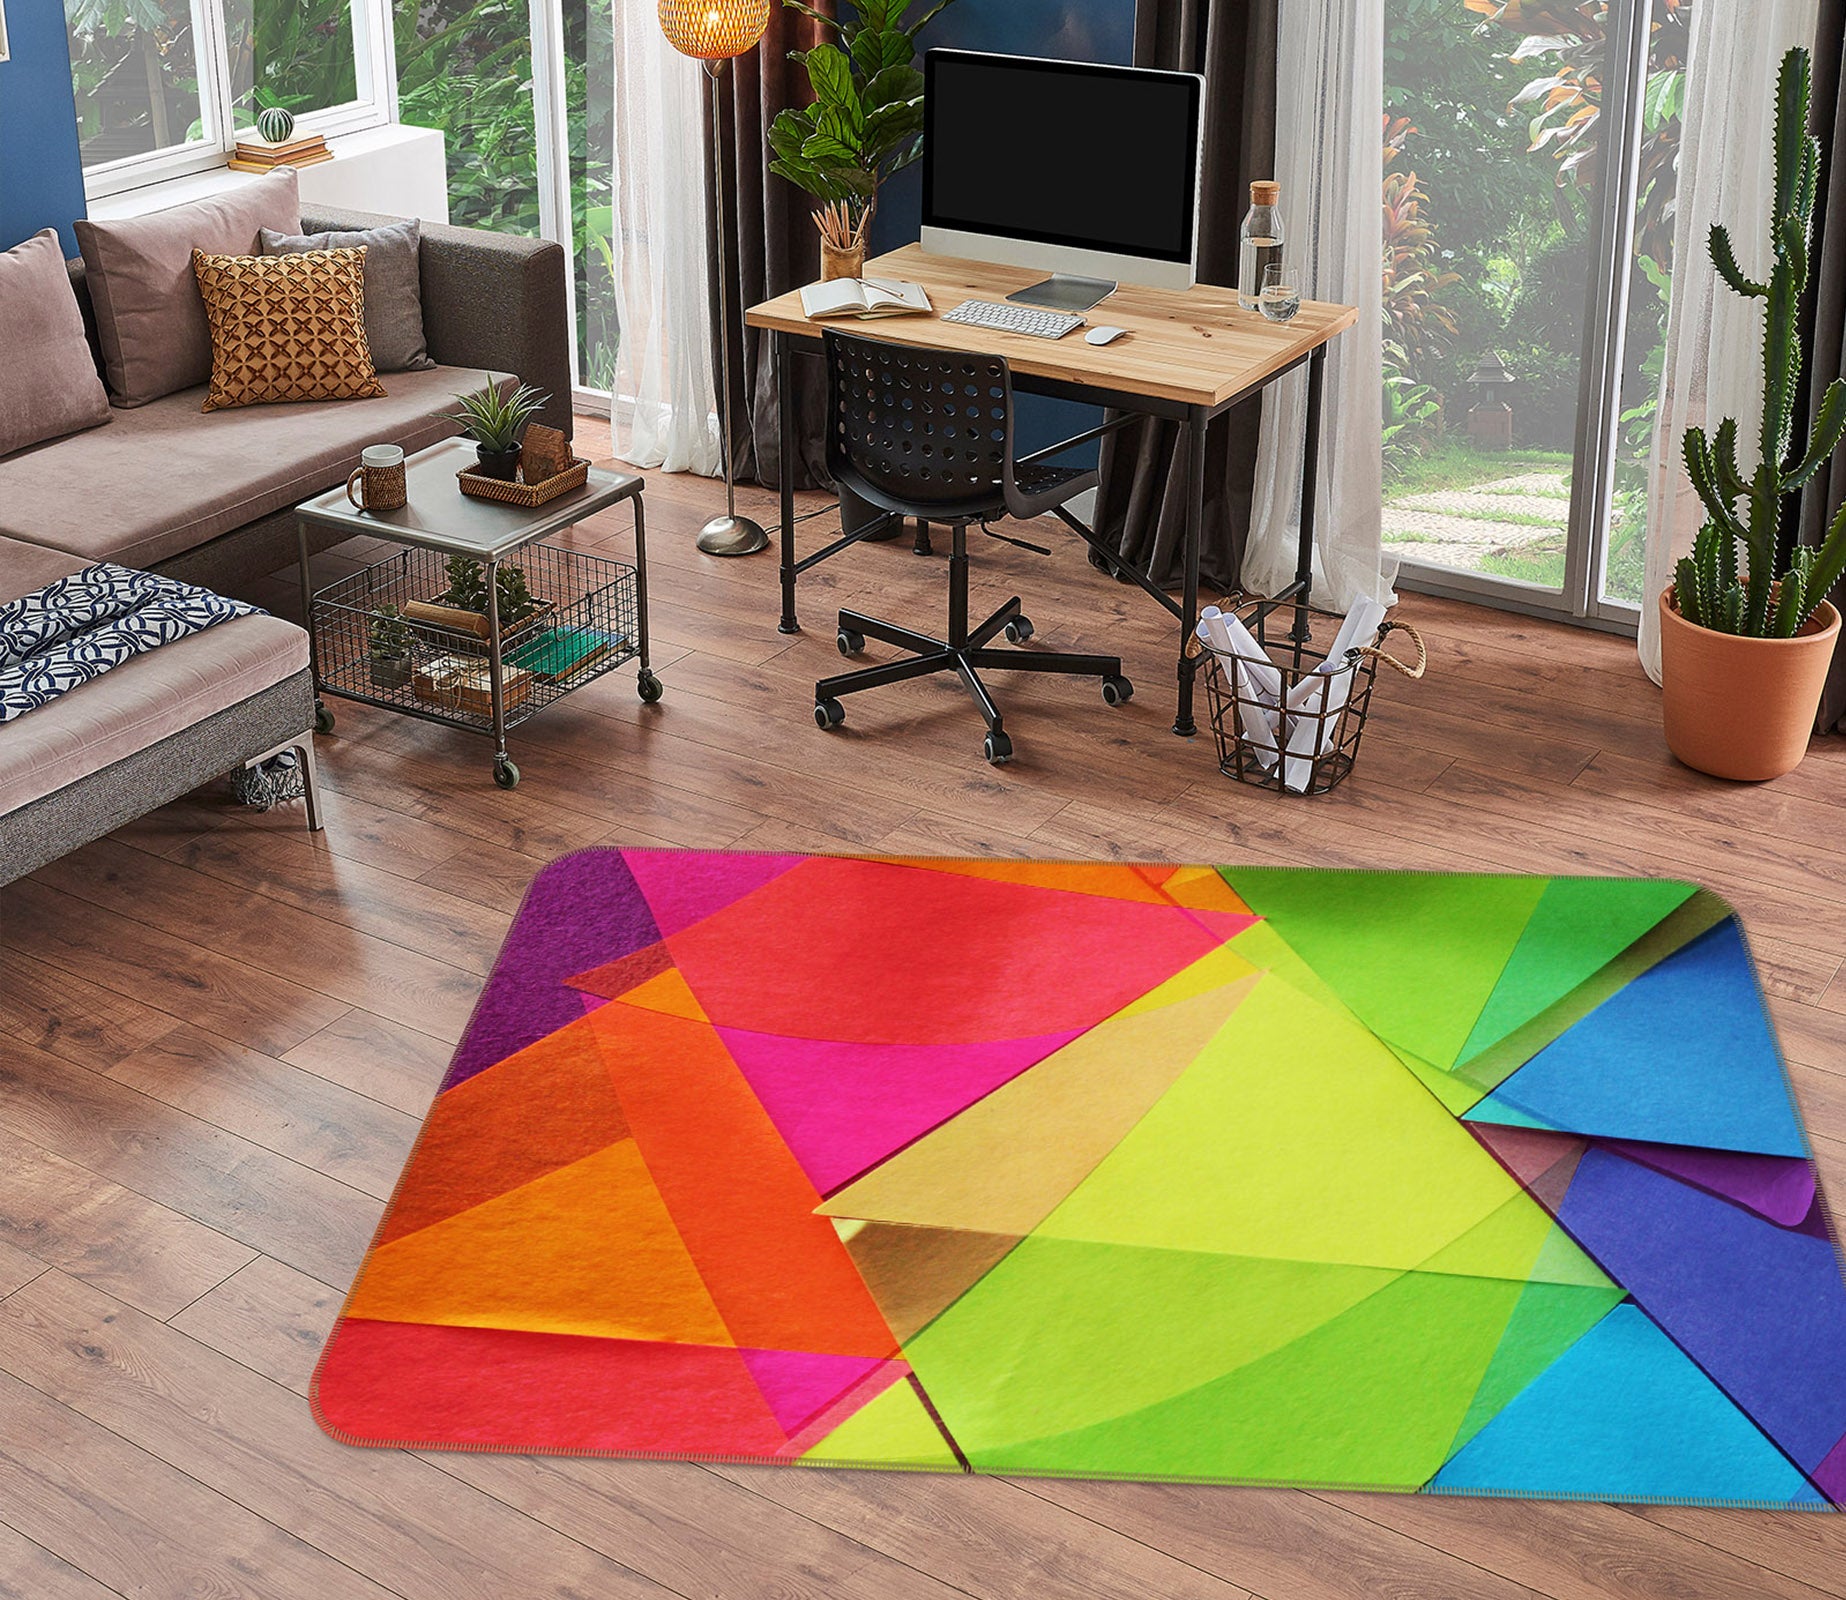 3D Colored Triangle 71025 Shandra Smith Rug Non Slip Rug Mat